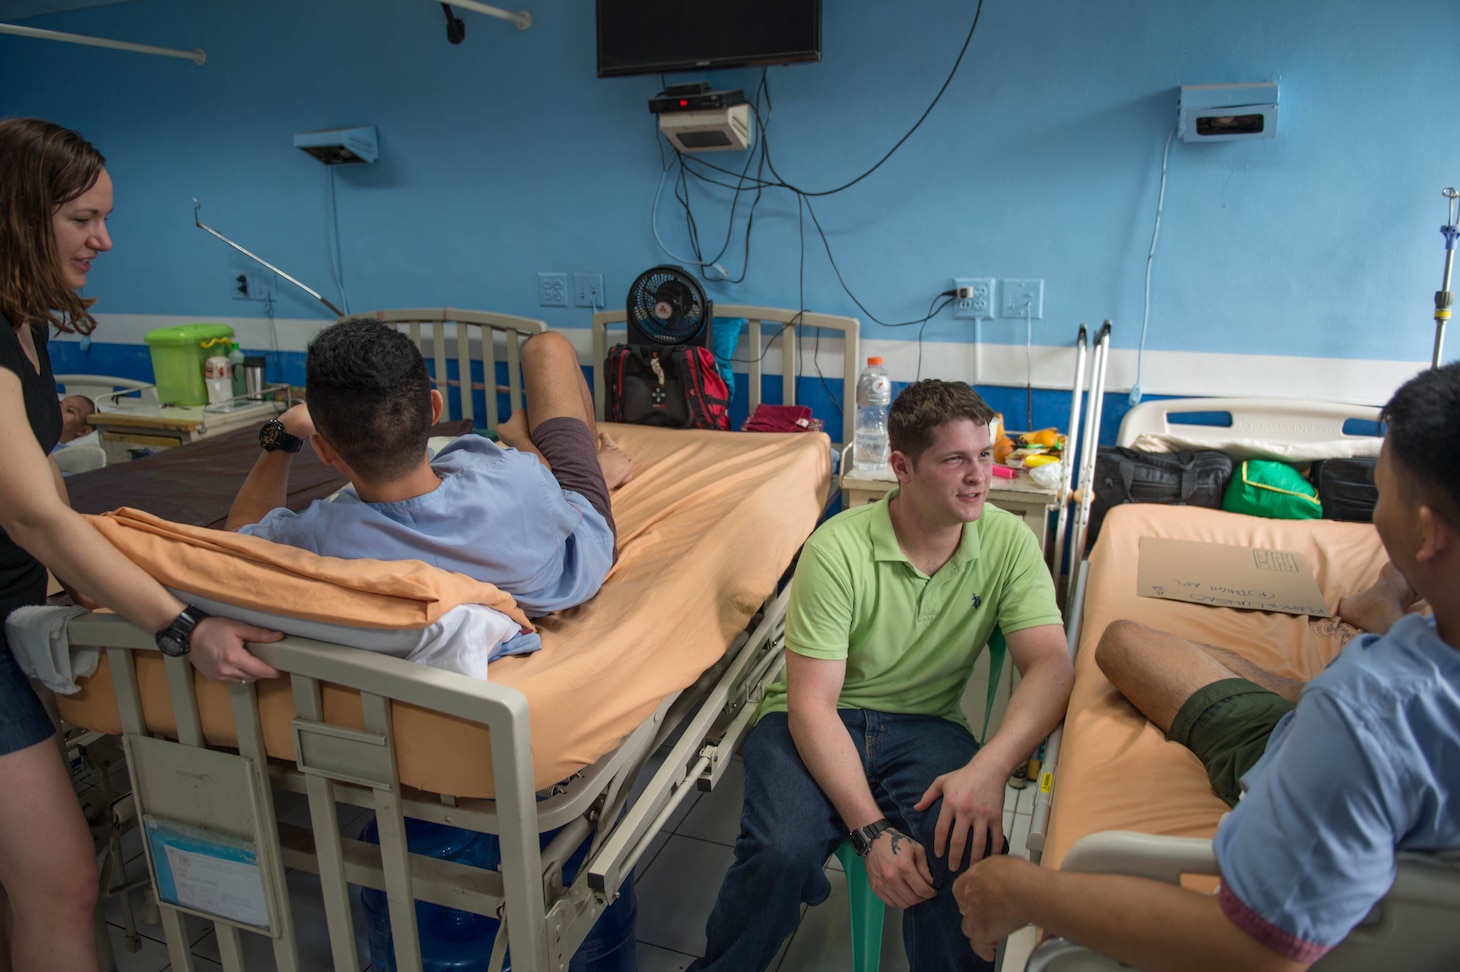 160523-N-KM939-160 QUEZON CITY, Philippines (May 23, 2016) Lt. j.g. Cassandra Mulkey and Hospital Corpsman 2nd Class Jordan Witten, both assigned to USS John C. Stennis (CVN 74), talk with injured Filipino soldiers at the Armed Forces of the Philippines Medical Center during a community service event. John C. Stennis is in the Philippines for a routine port visit but participates in community service programs to learn and work alongside their host-nation counterparts. Providing a ready force supporting security and stability in the Indo-Asia-Pacific, John C. Stennis is operating as part of the Great Green Fleet on a regularly scheduled 7th Fleet deployment. (U.S. Navy photo by Mass Communication Specialist 3rd Class David Cox/Released)